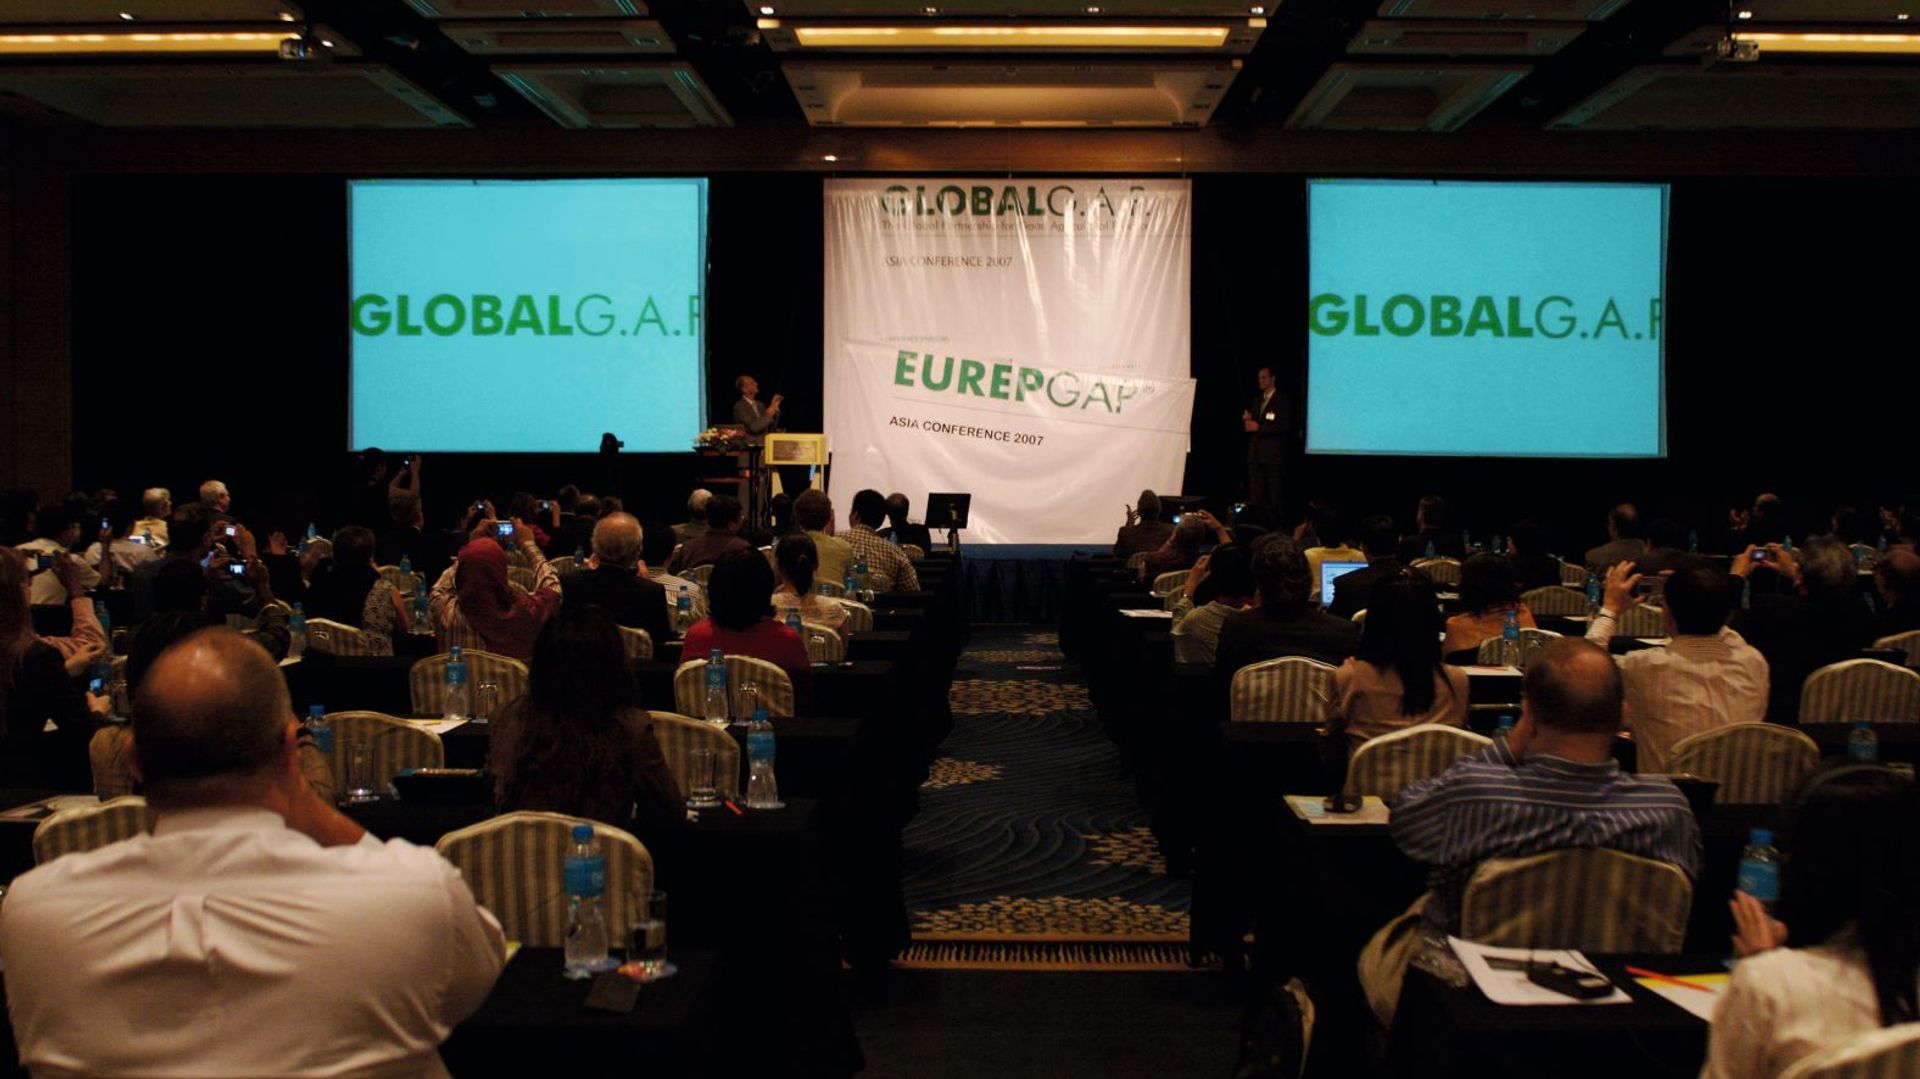 EurepGAP announcing the rebranding to GLOBALG.A.P. at the Bangkok conference in 2007